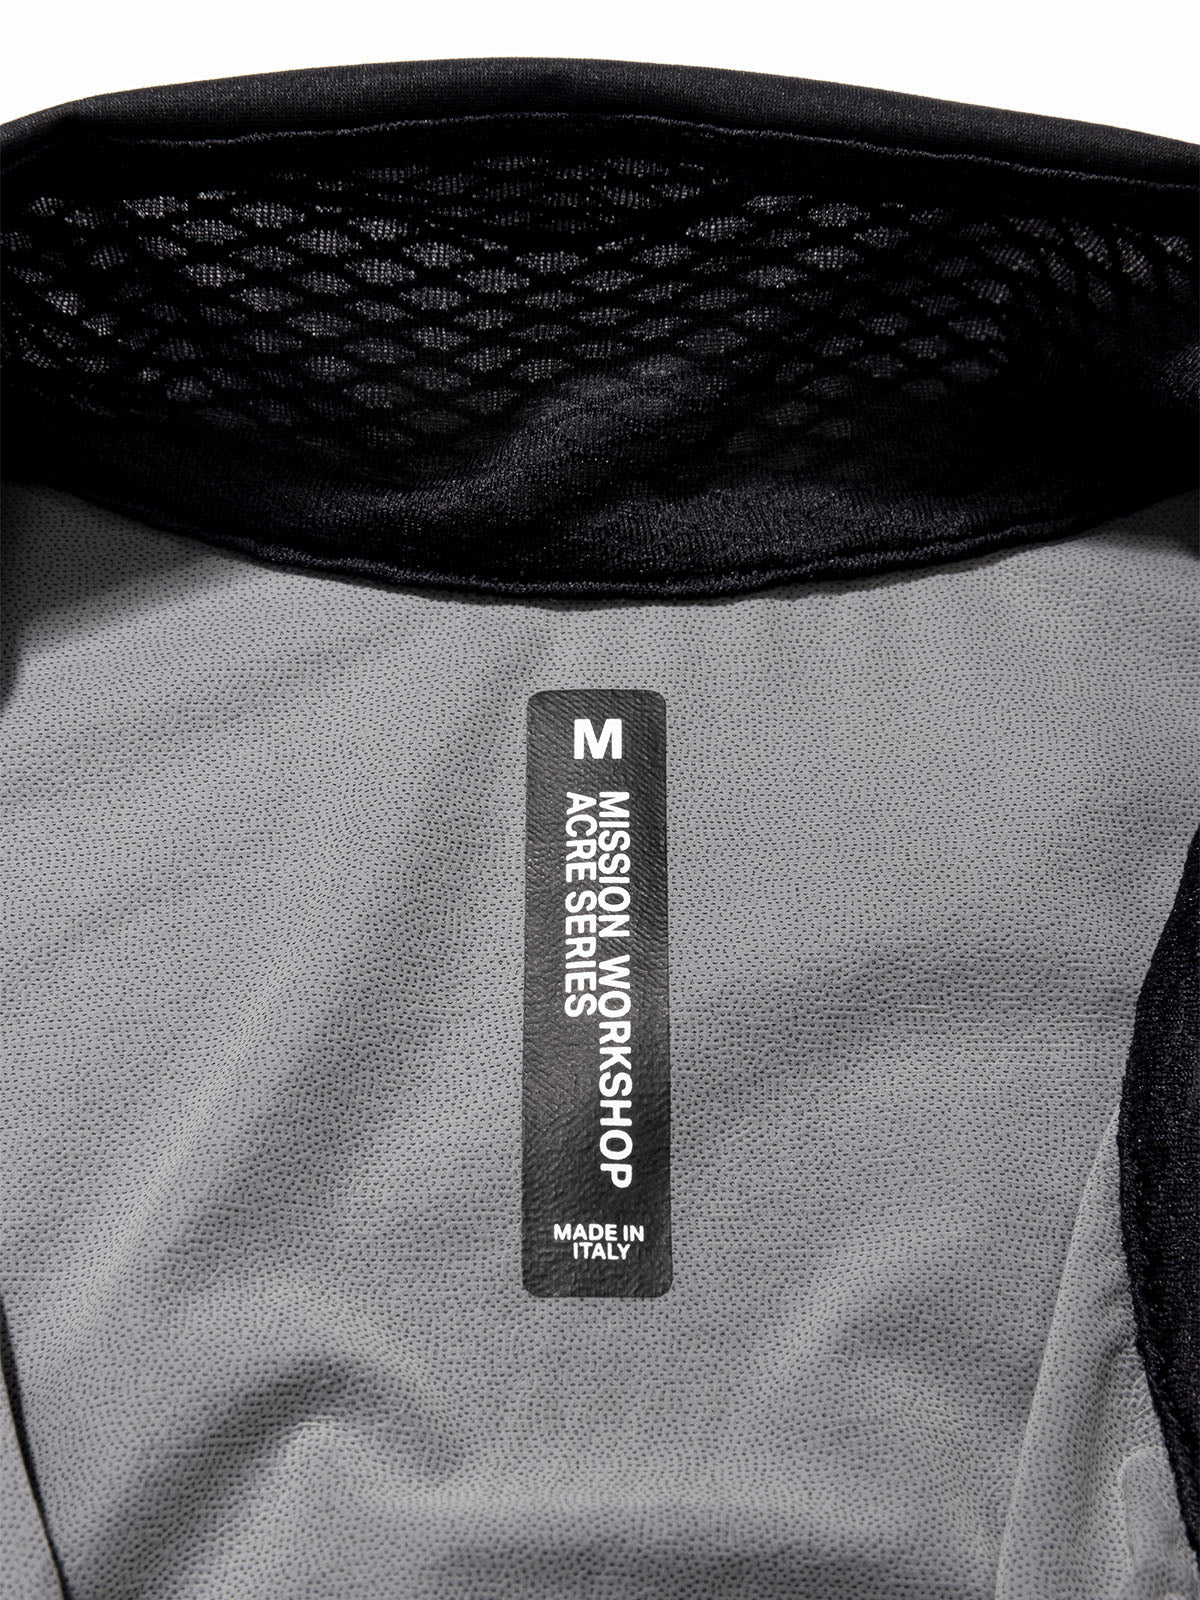 Altosphere Jacket by Mission Workshop - Weatherproof Bags & Technical Apparel - San Francisco & Los Angeles - Built to endure - Guaranteed forever